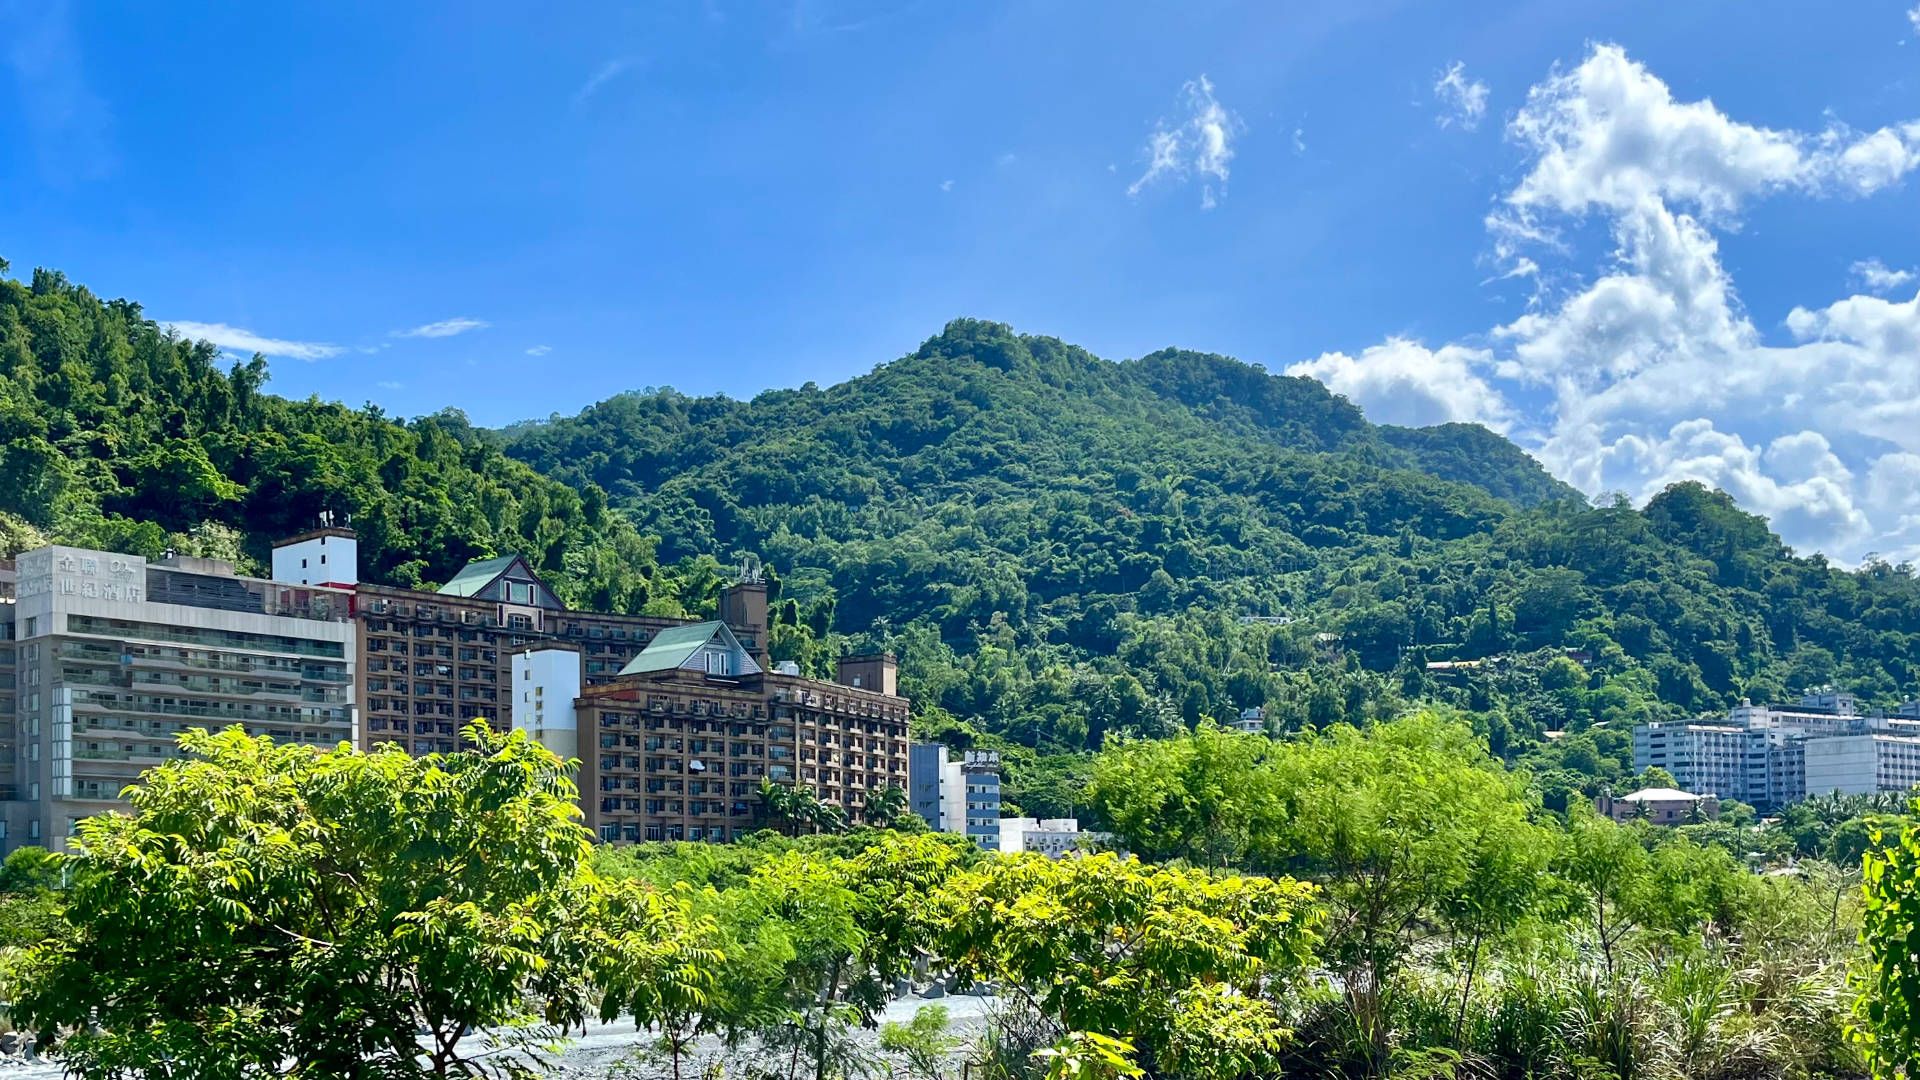 A wide-angle photo of a series of multi-story hotel buildings along a riverfront, with tree-covered mountains in the background.